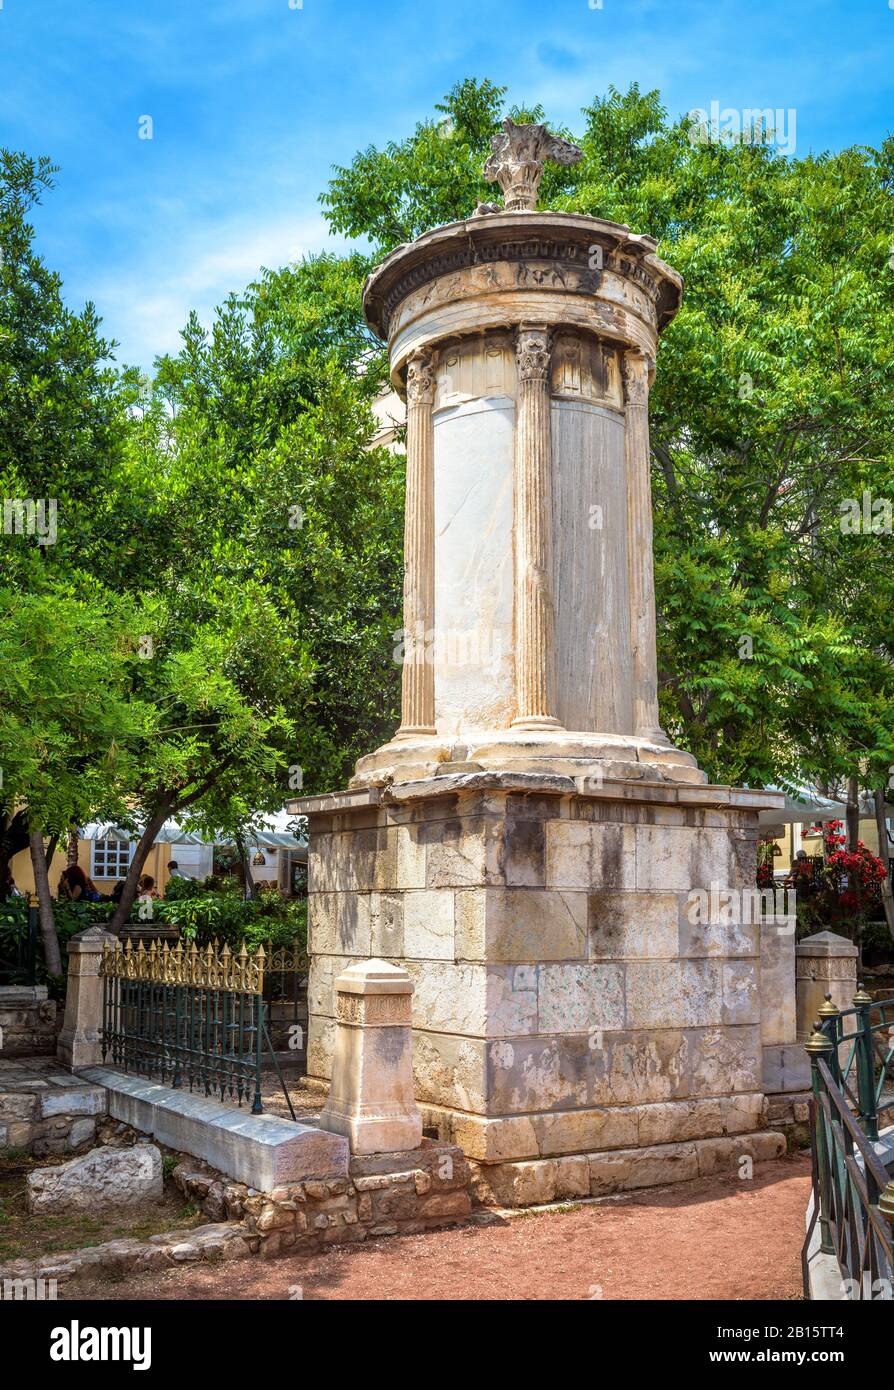 Monument of Lysicrates, Athens, Greece. It is an ancient landmark of the city. Classical Greek ruins in the Athens center near Acropolis. Vertical vie Stock Photo